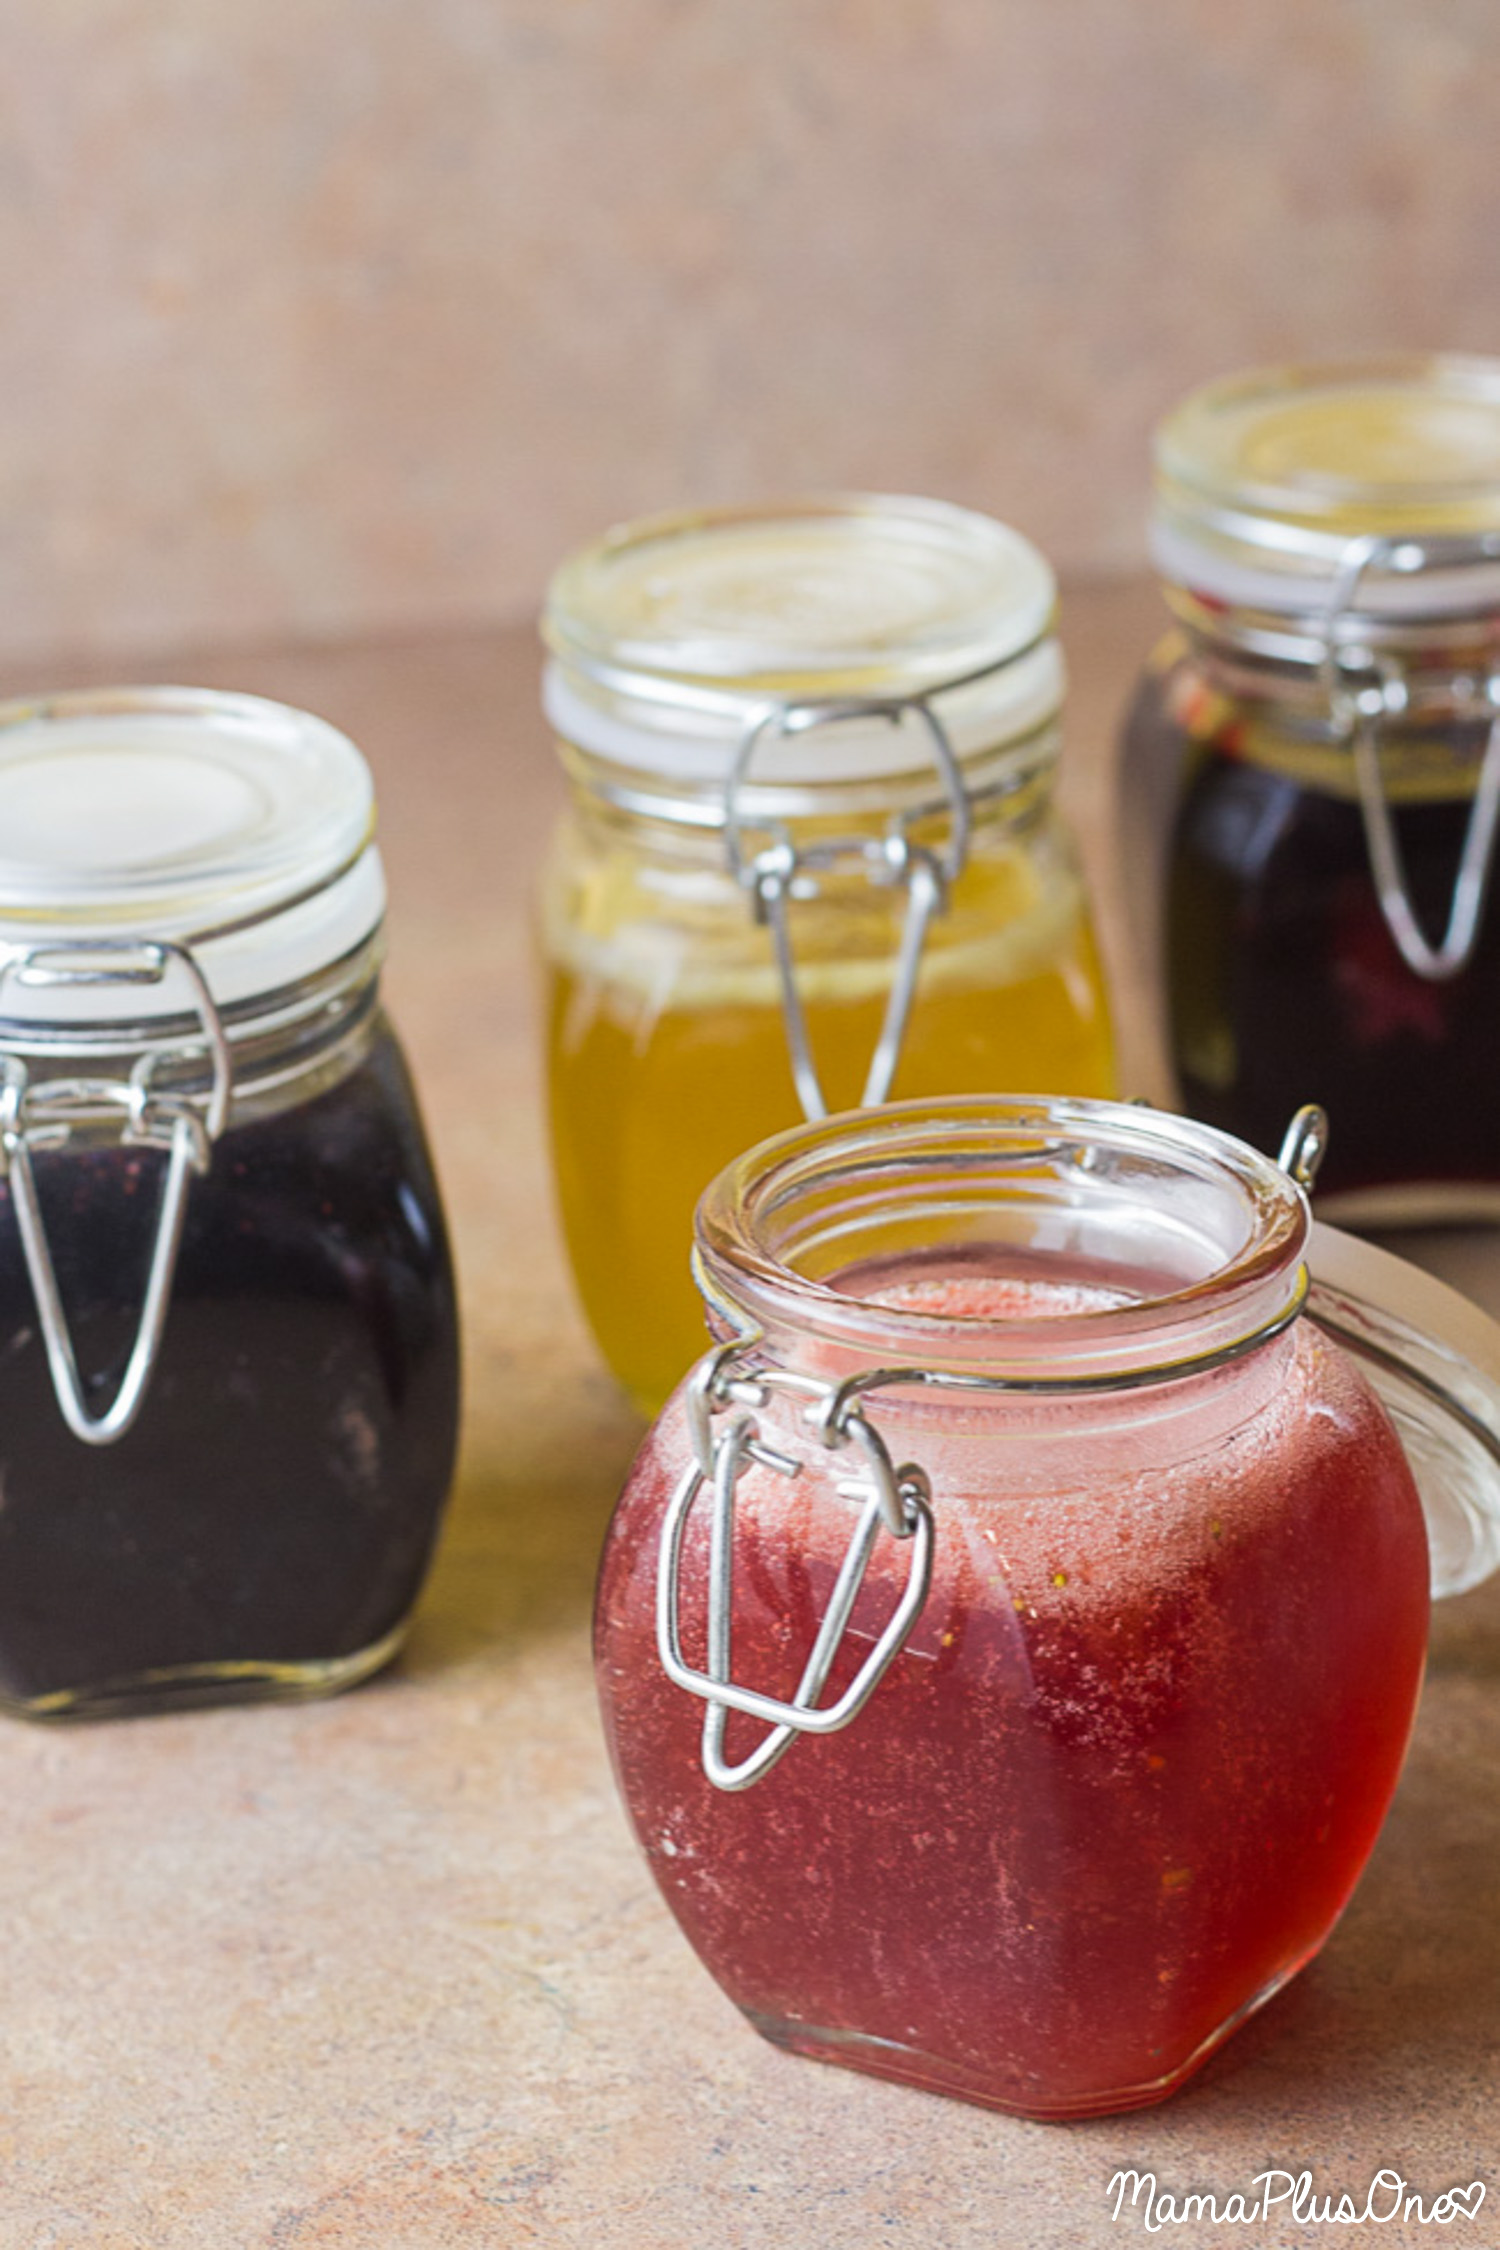 Hello, morning. These fruit flavored syrups are infused with REAL fruit, making them delicious and colorful for waffles and pancakes in the mornings! They're super simple to make and you can even refrigerate them for a few weeks for using anytime. If you love the flavored syrups at IHOP or other restaurants, you'll love this.